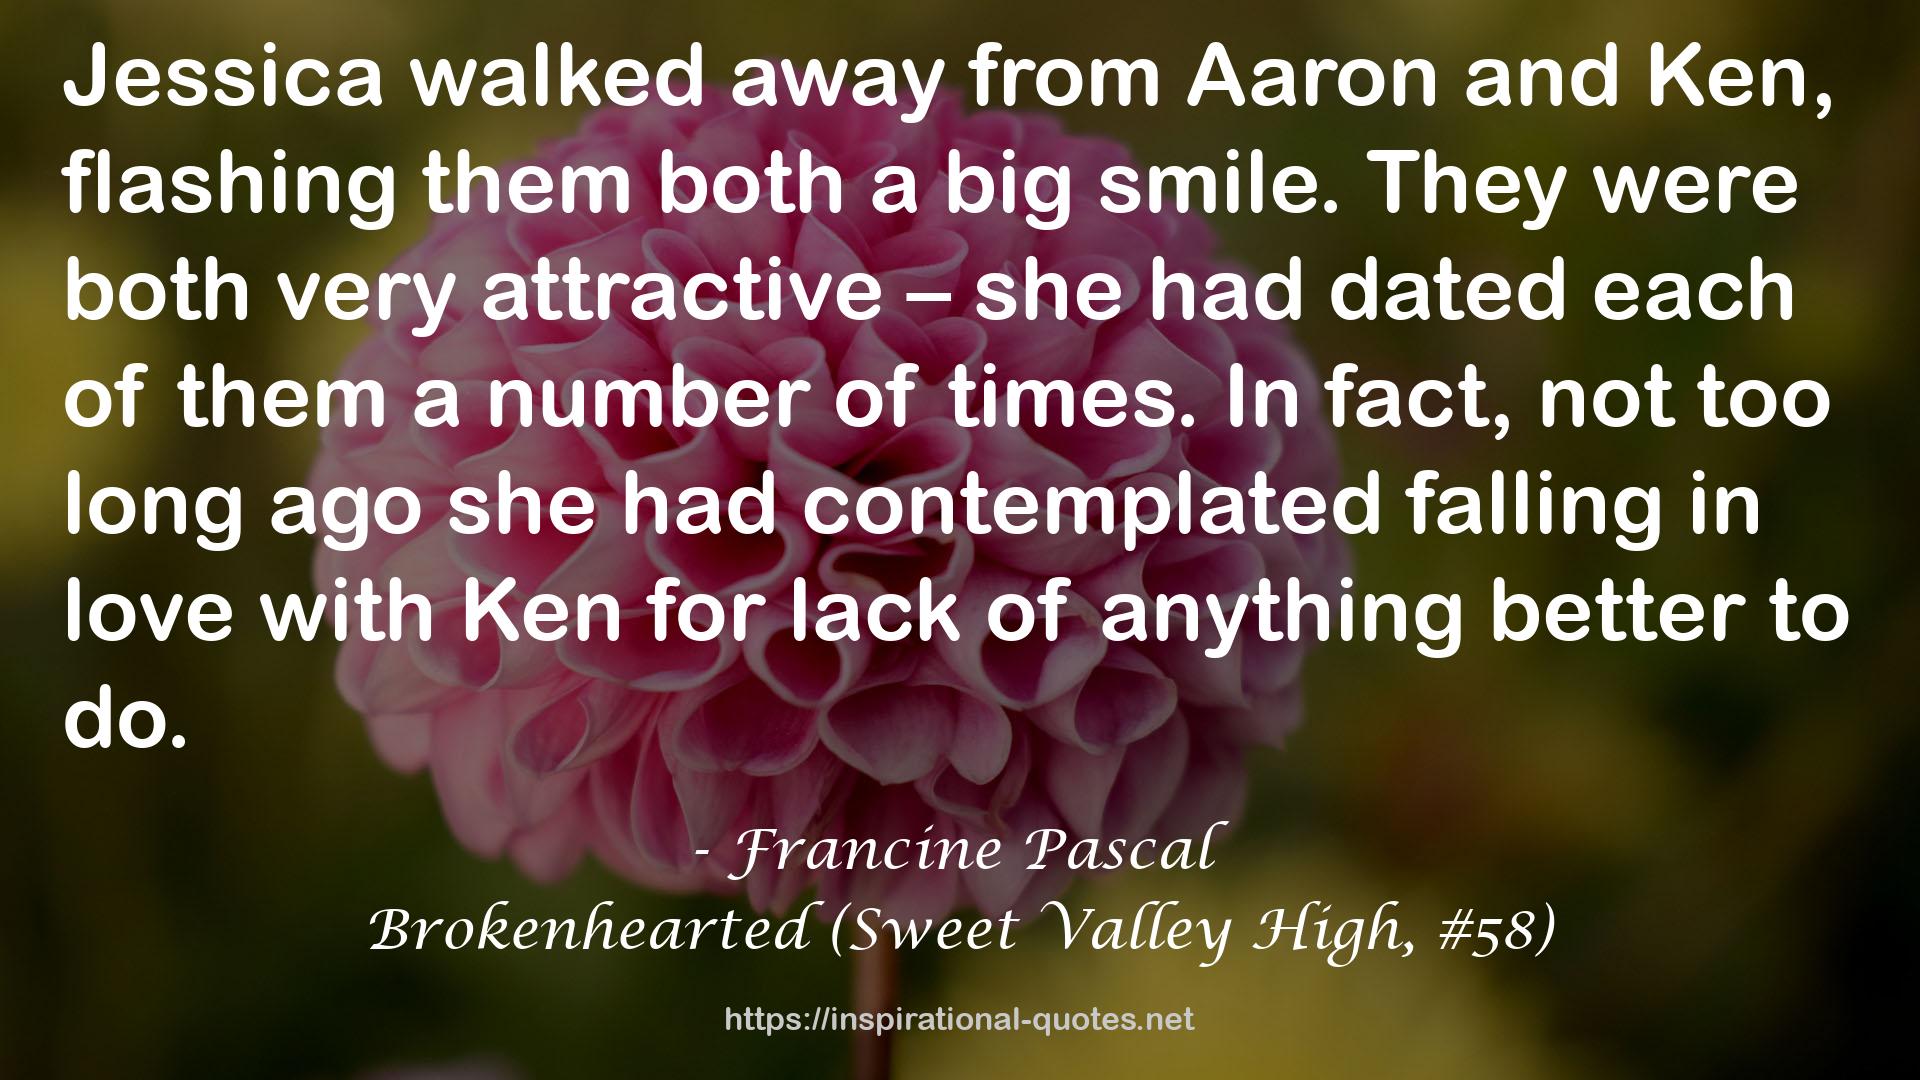 Brokenhearted (Sweet Valley High, #58) QUOTES